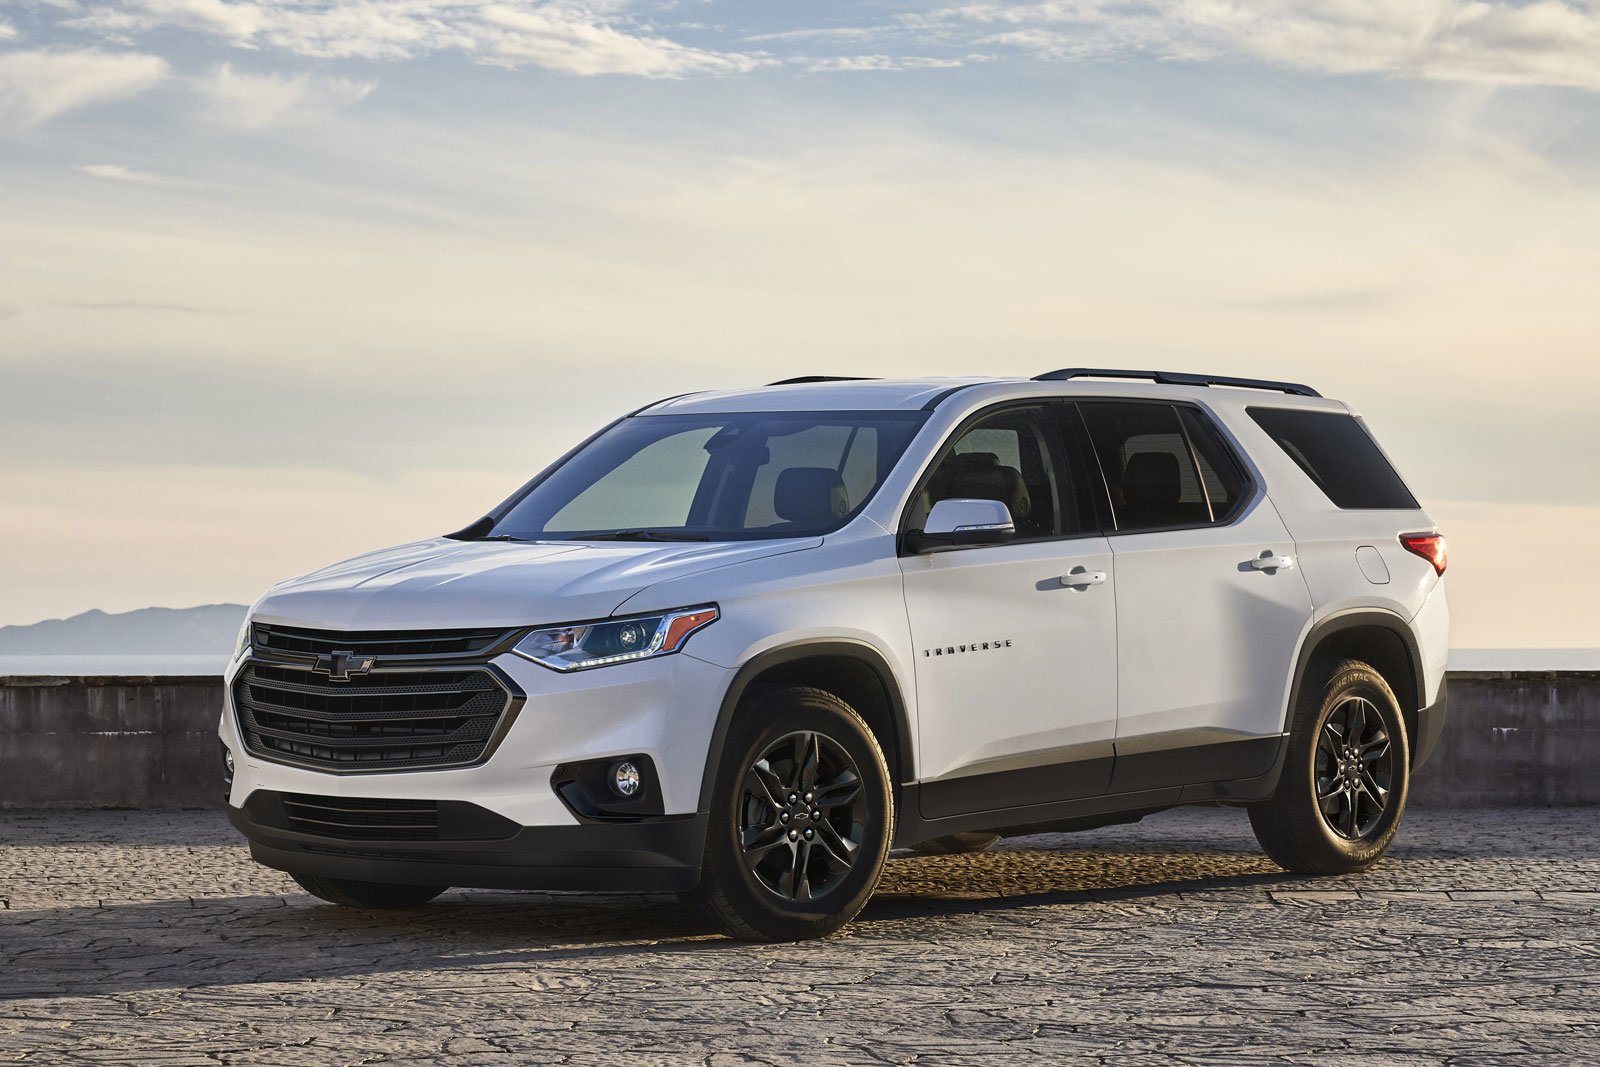 2022 Chevrolet Traverse Pricing, Specs, and Review - Wallace Chevrolet Blog